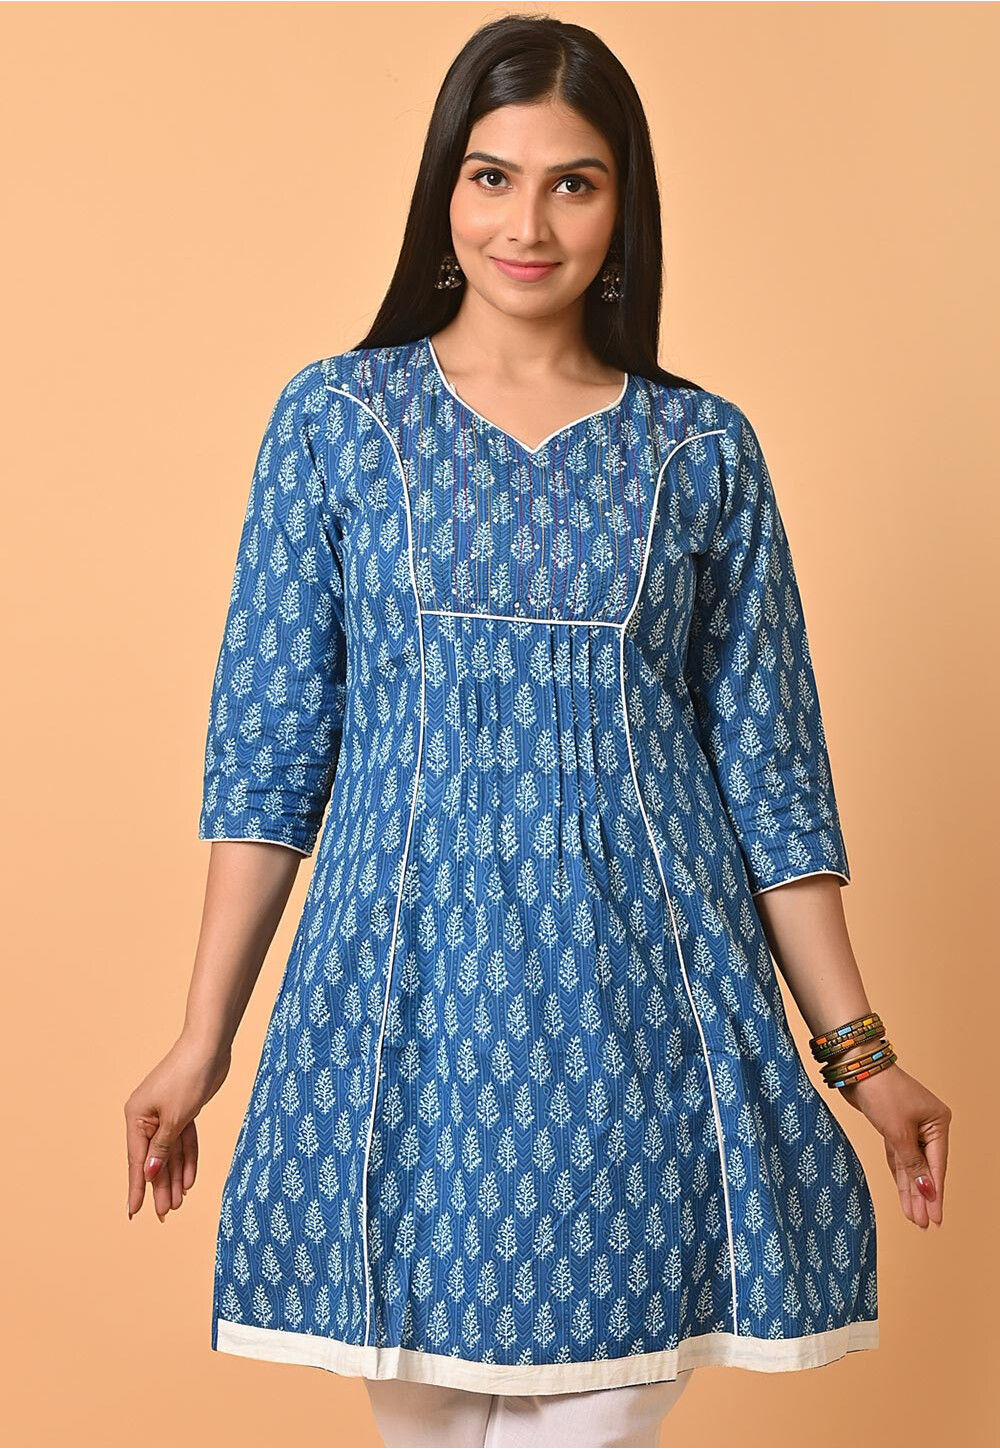 Top Simple A-line Kurti Designs That Are in Style | by Shayla Sharma |  Medium